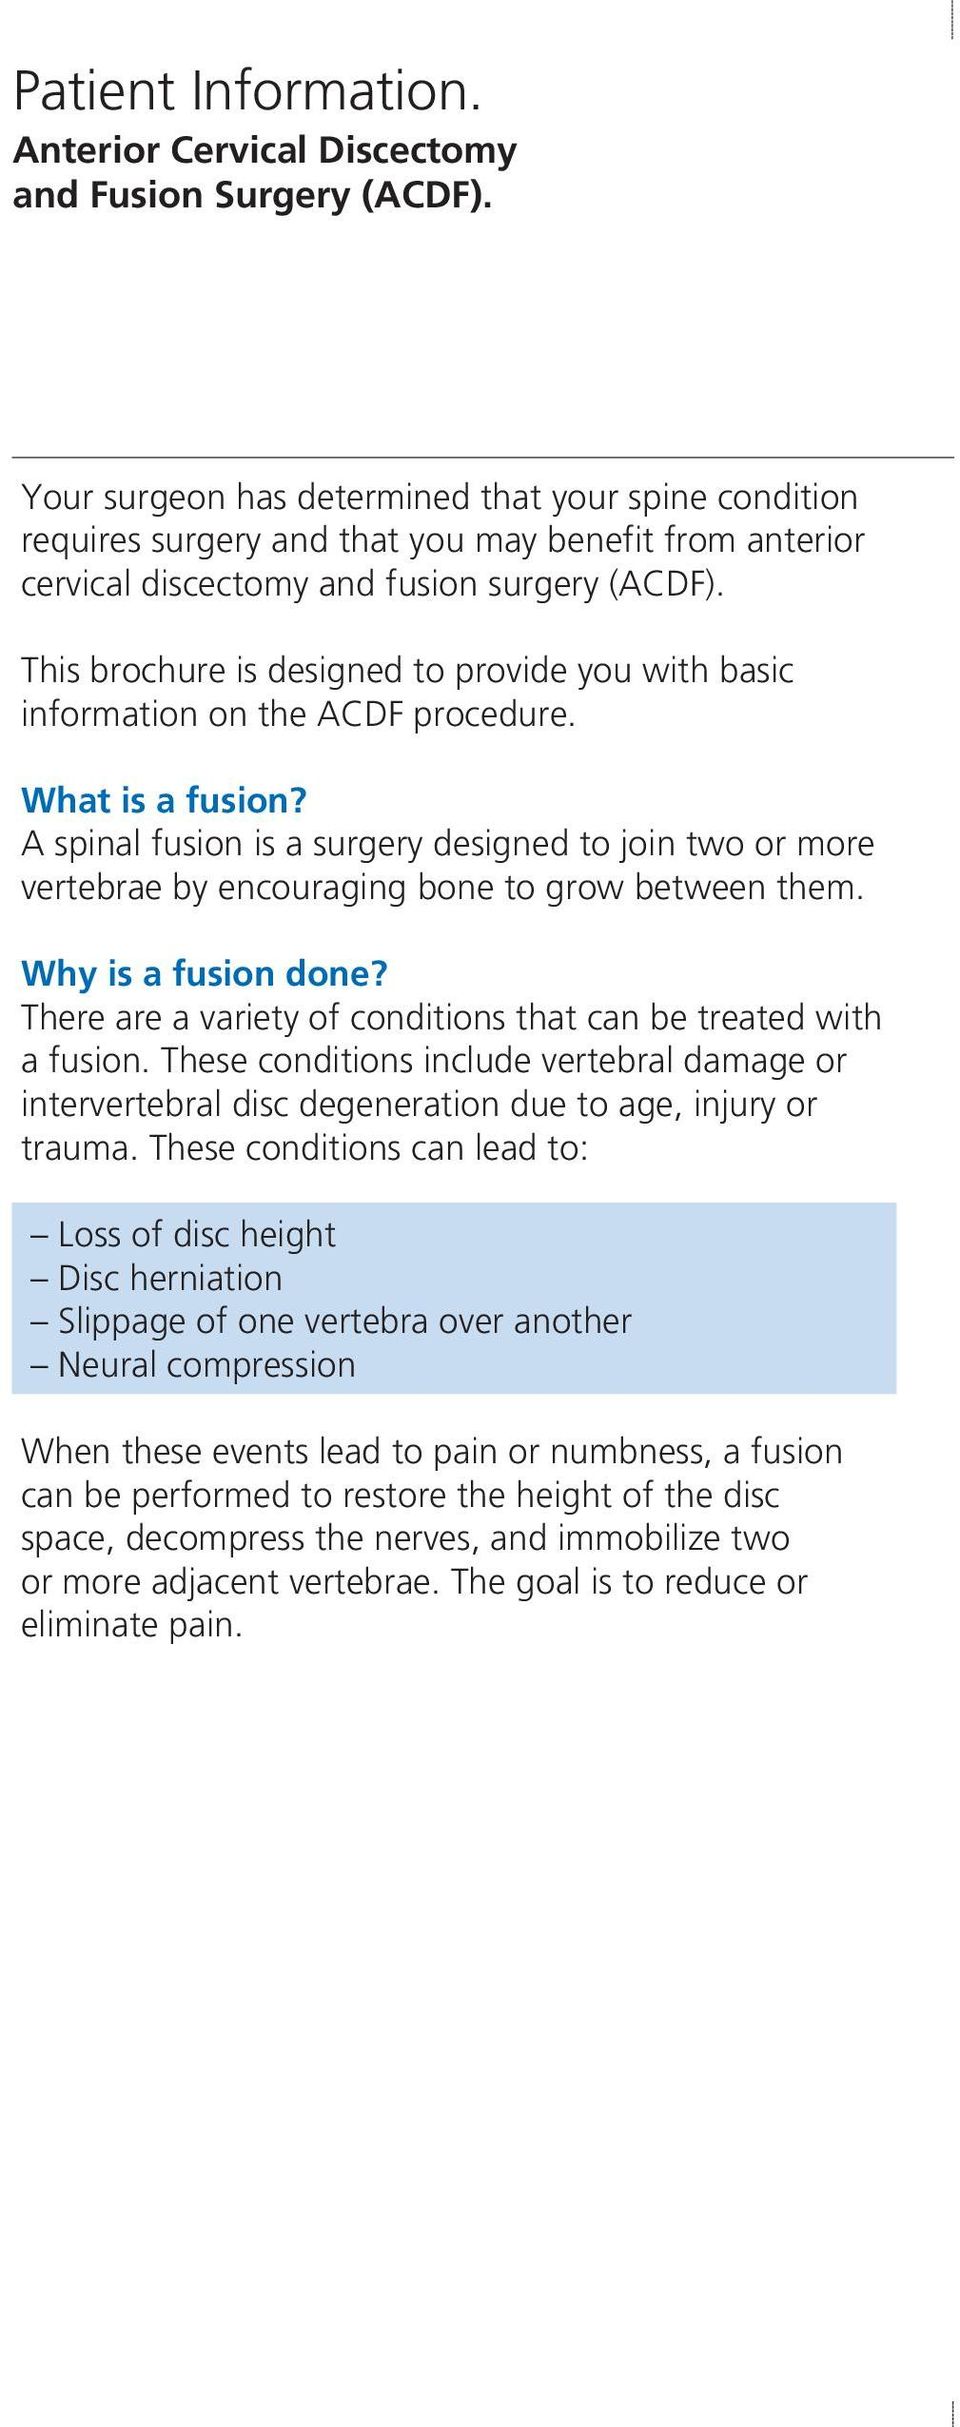 This brochure is designed to provide you with basic information on the ACDF procedure. What is a fusion?